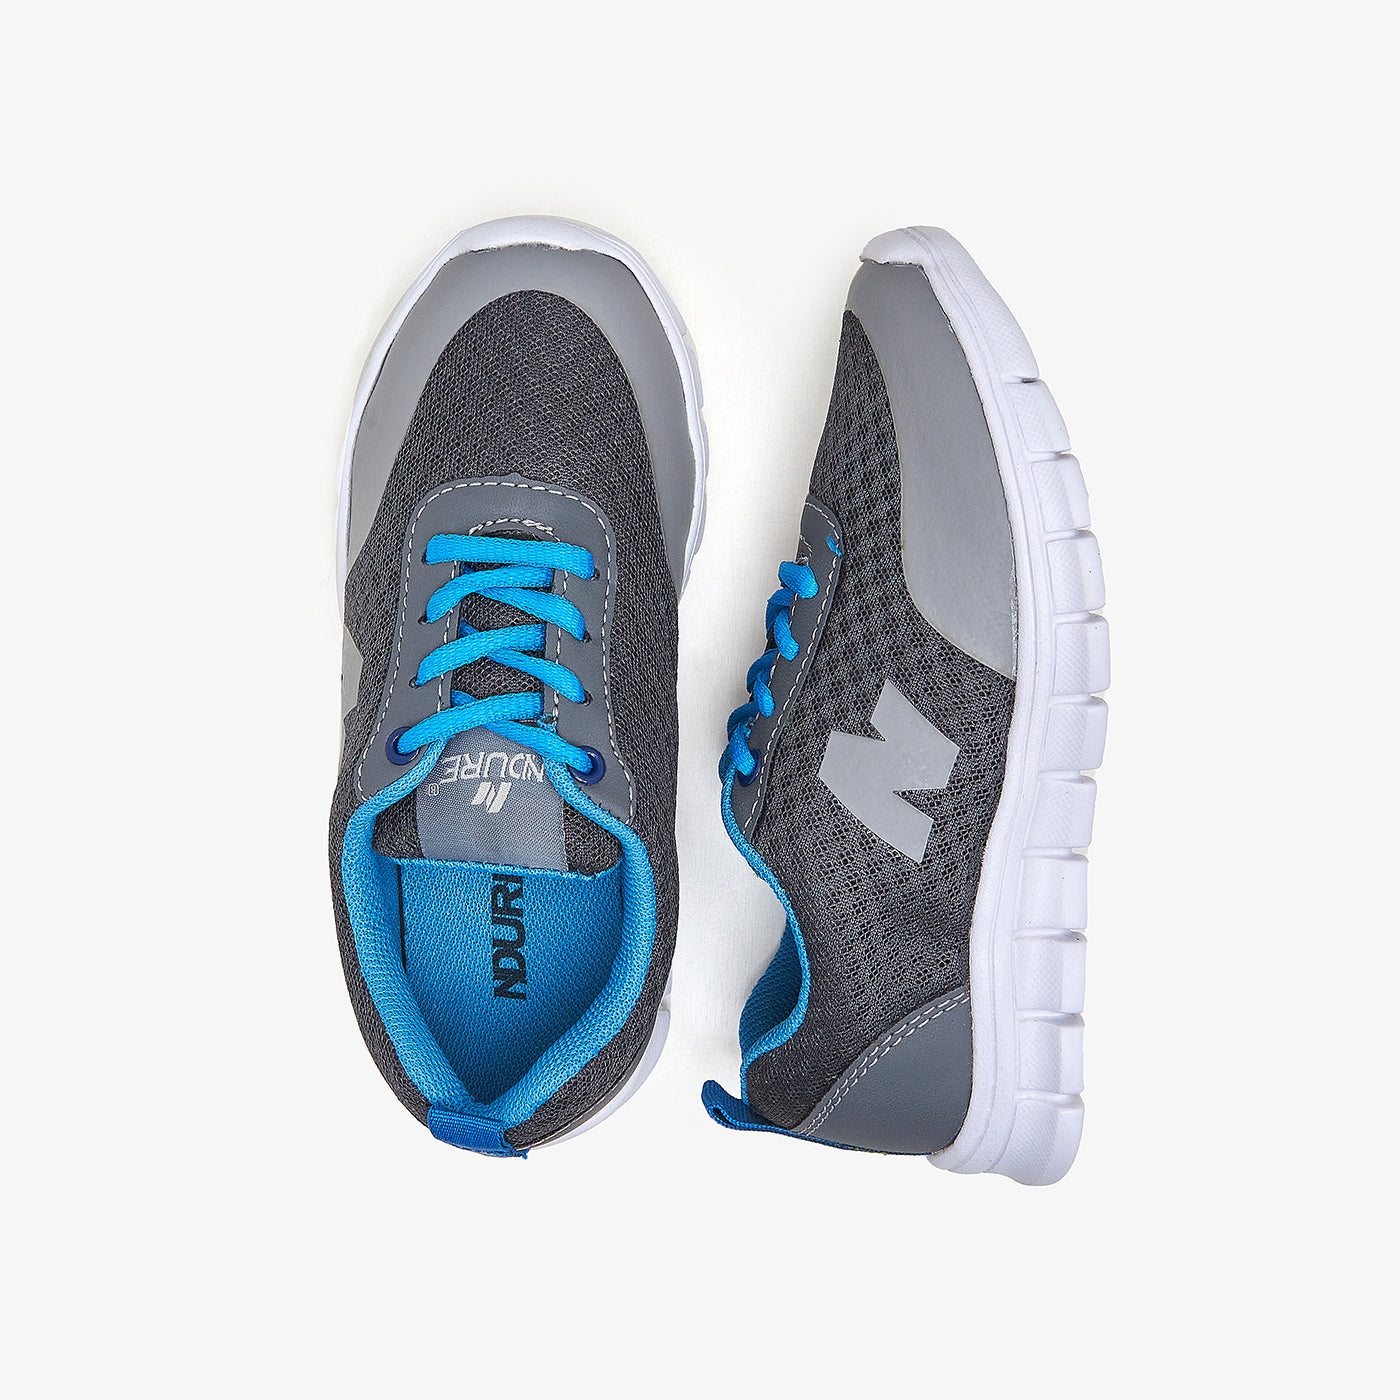 Best Athletic Shoes price in Pakistan